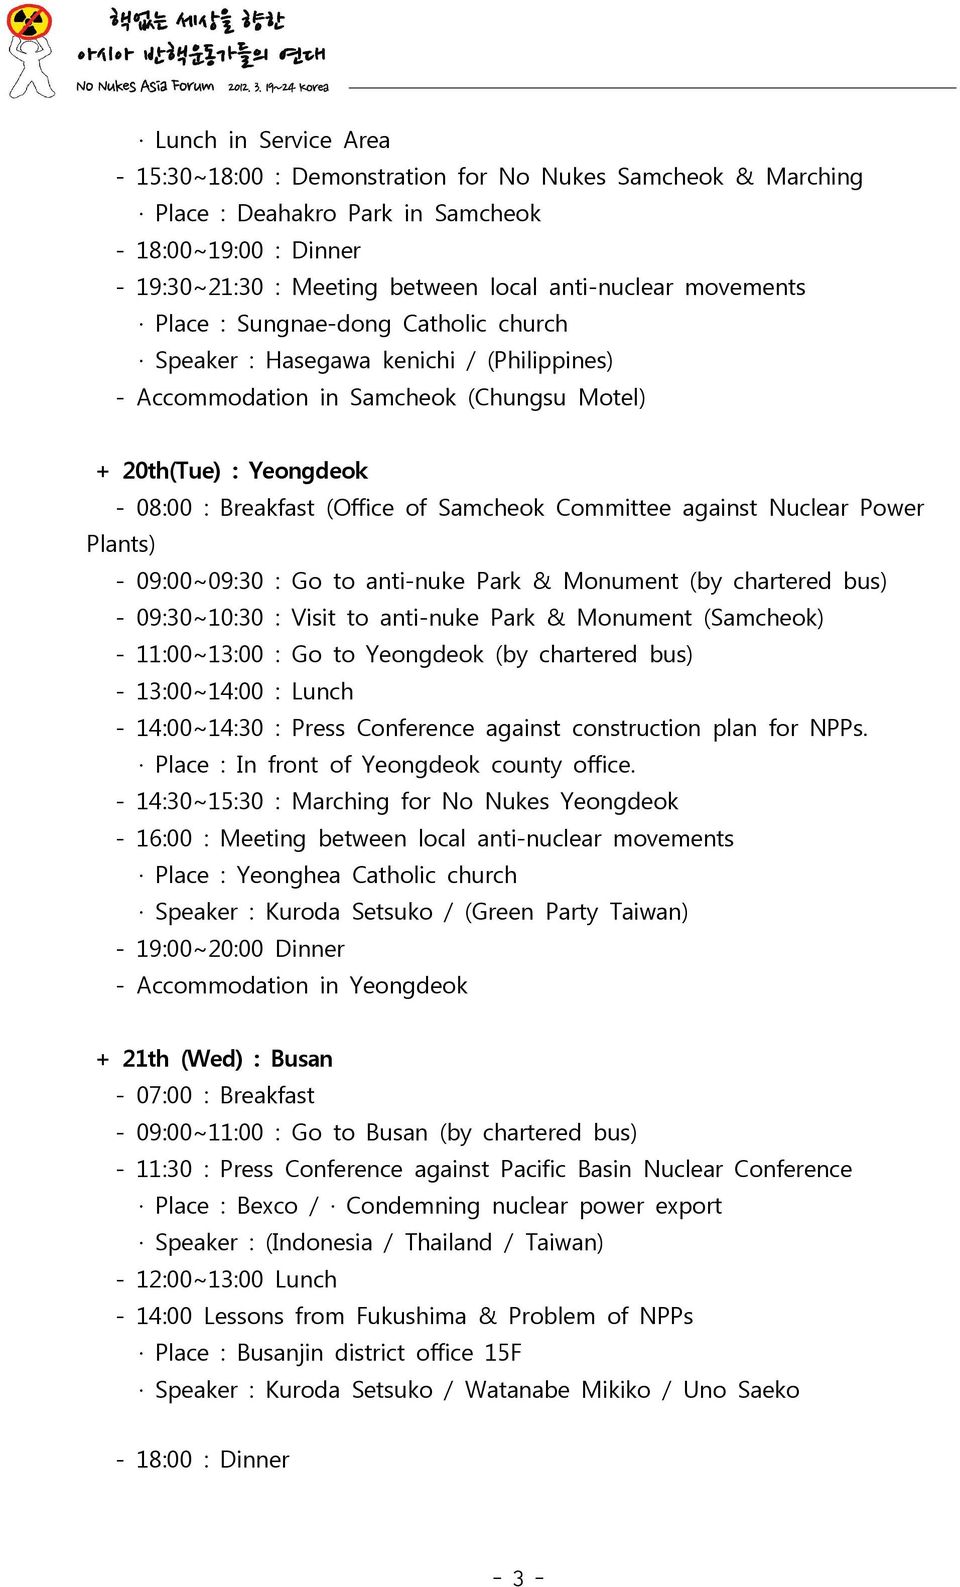 Committee against Nuclear Power Plants) - 09:00~09:30 : Go to anti-nuke Park & Monument (by chartered bus) - 09:30~10:30 : Visit to anti-nuke Park & Monument (Samcheok) - 11:00~13:00 : Go to